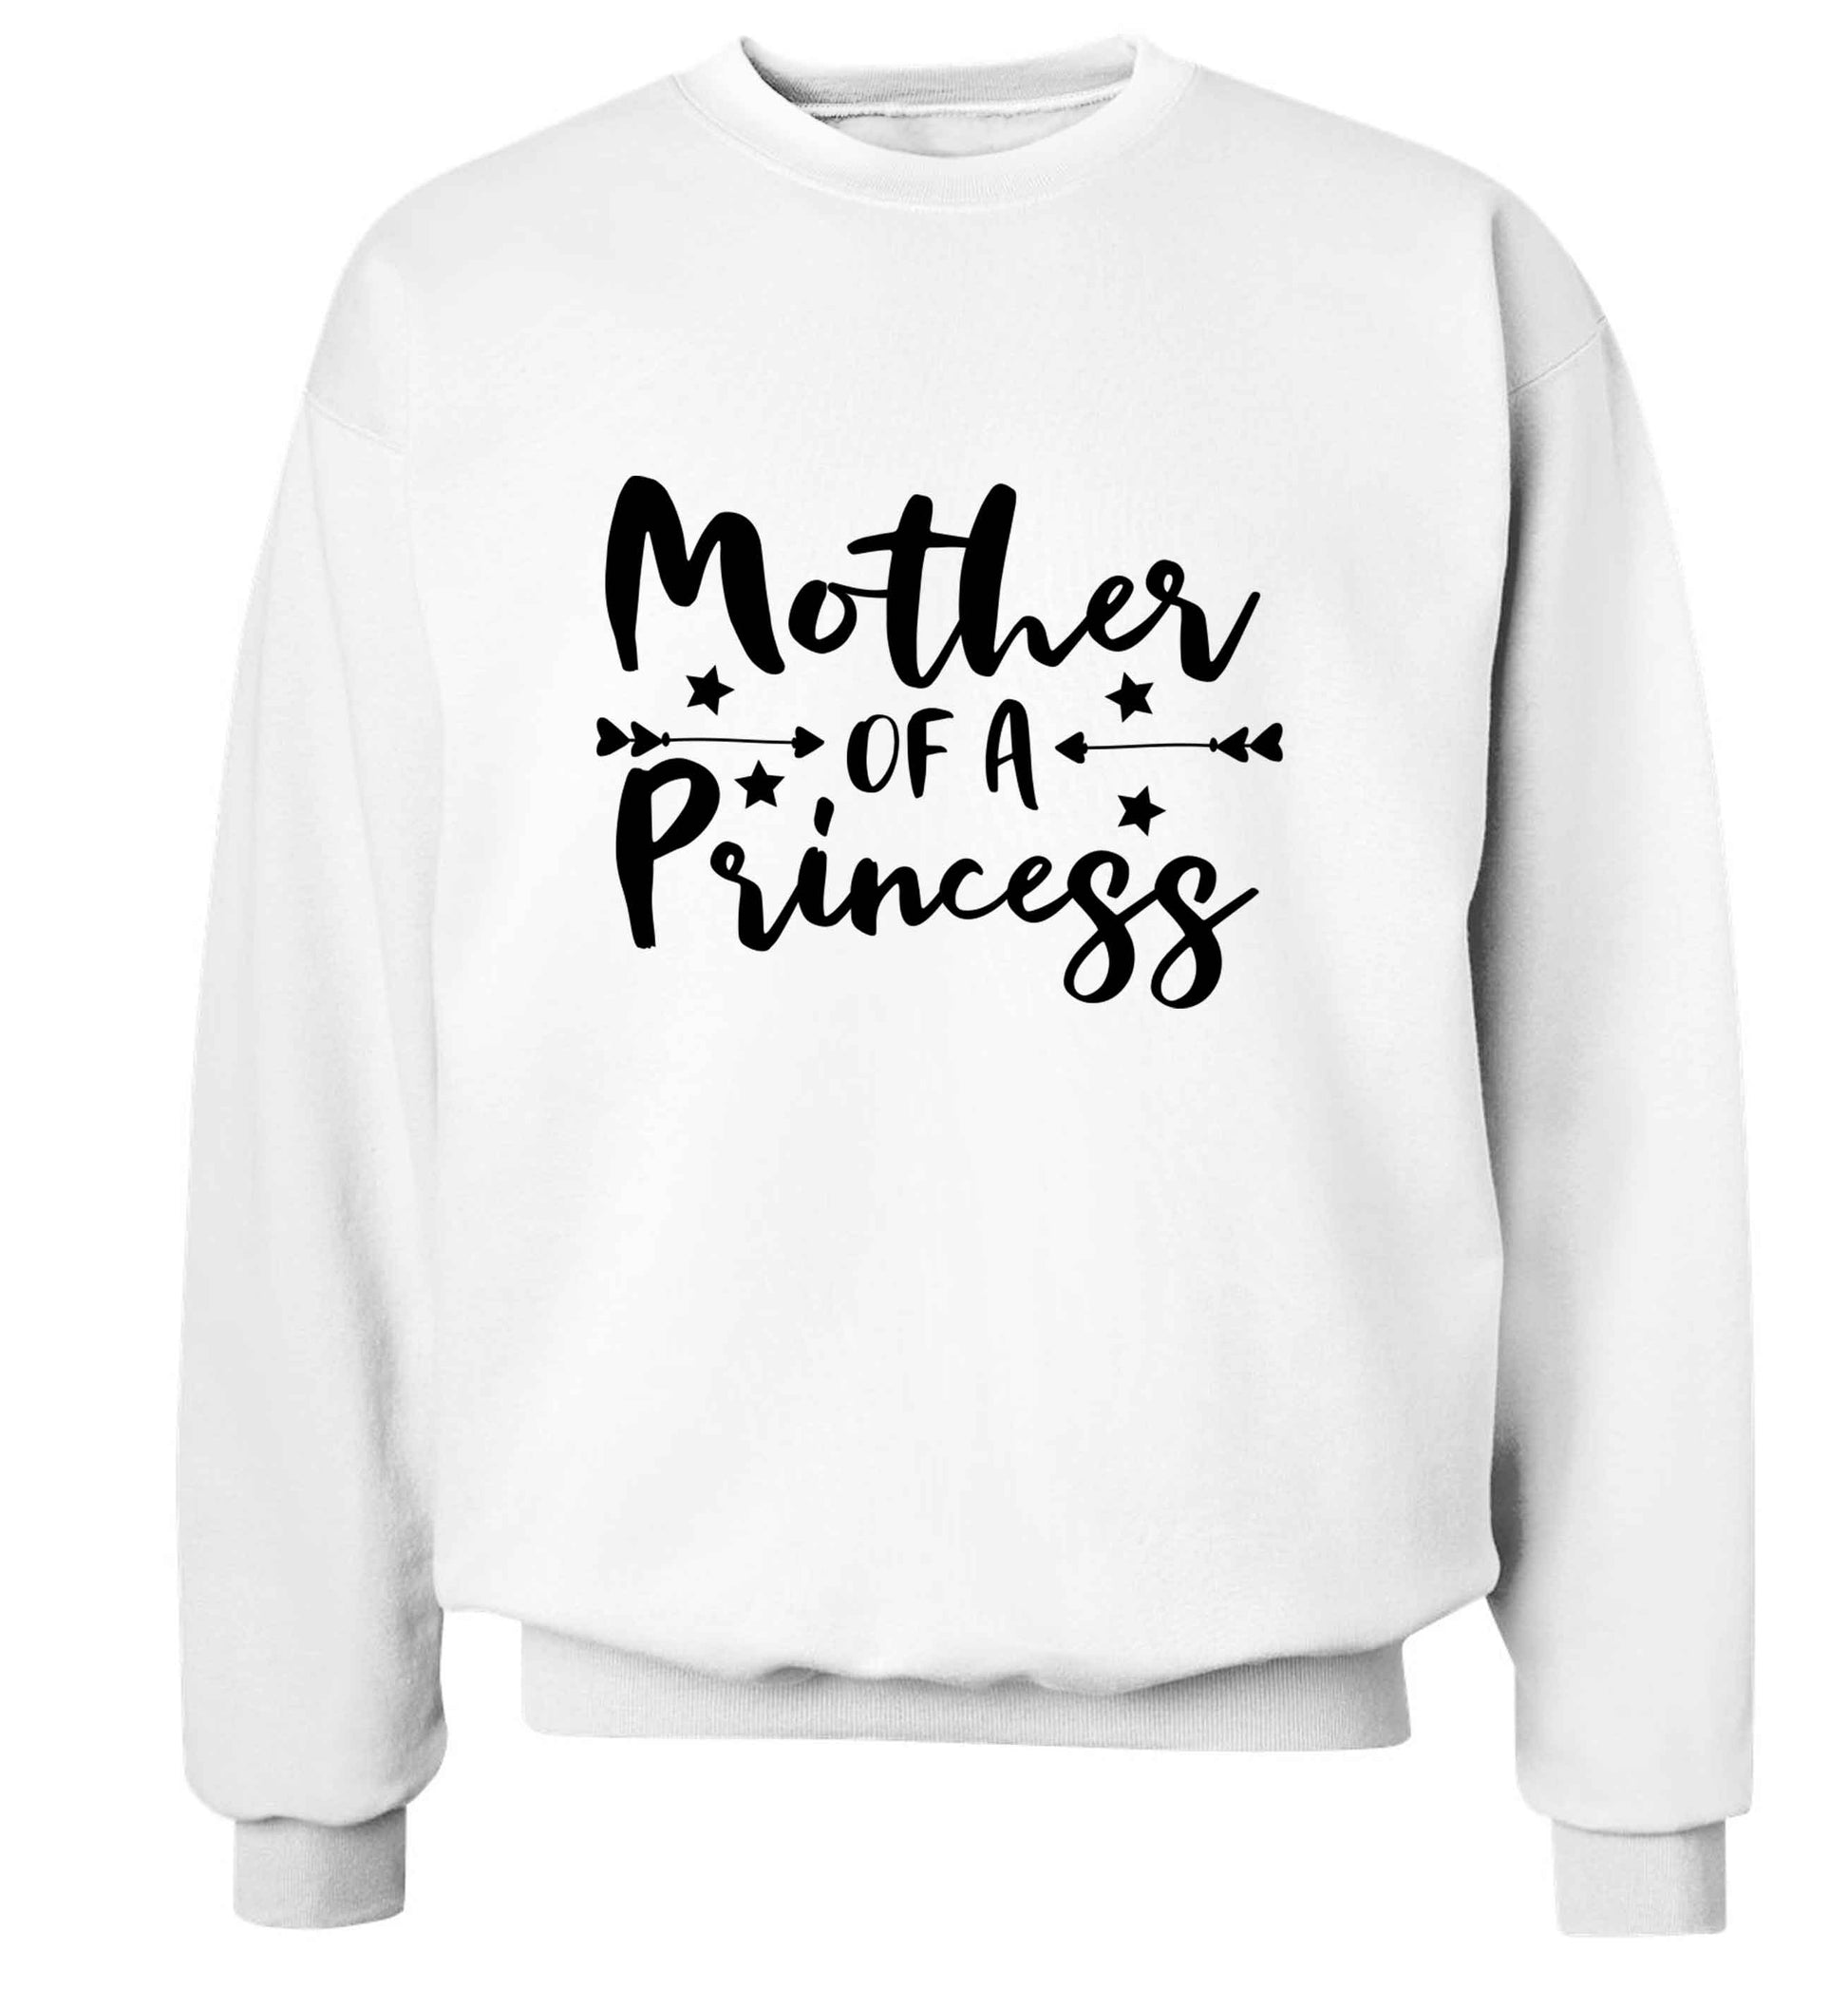 Mother of a princess adult's unisex white sweater 2XL